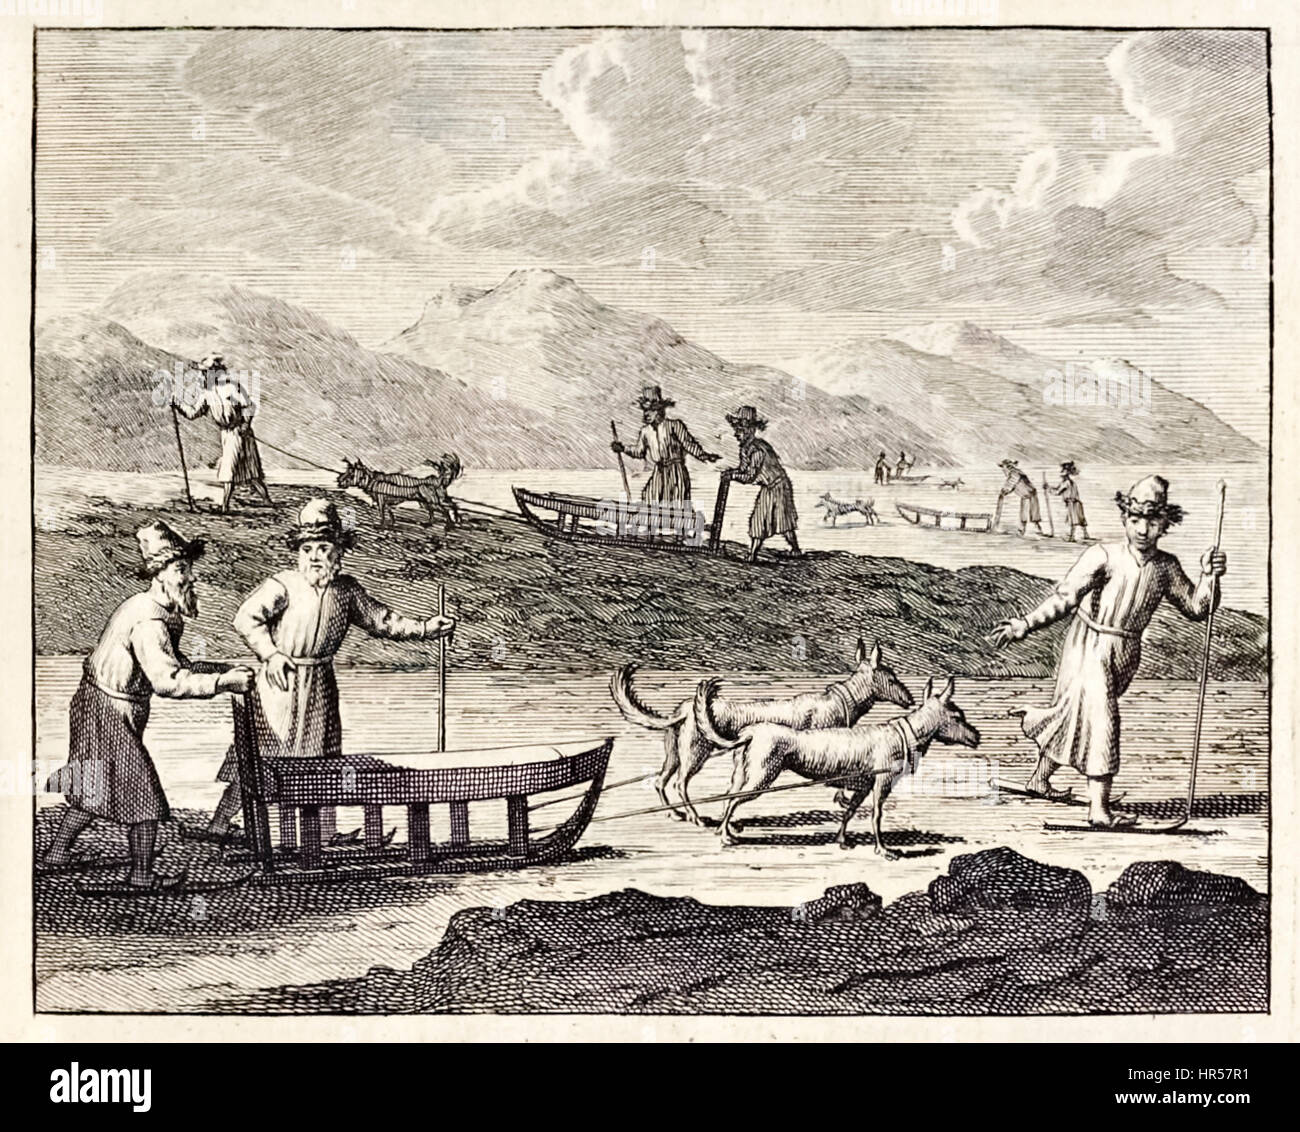 “Russians travelling with Dog sleds in Siberia.” From the ‘Voyages de Corneille le Brun’ by Cornelis de Bruijn (1652-1726) Dutch artist and traveller published in 1718. Stock Photo